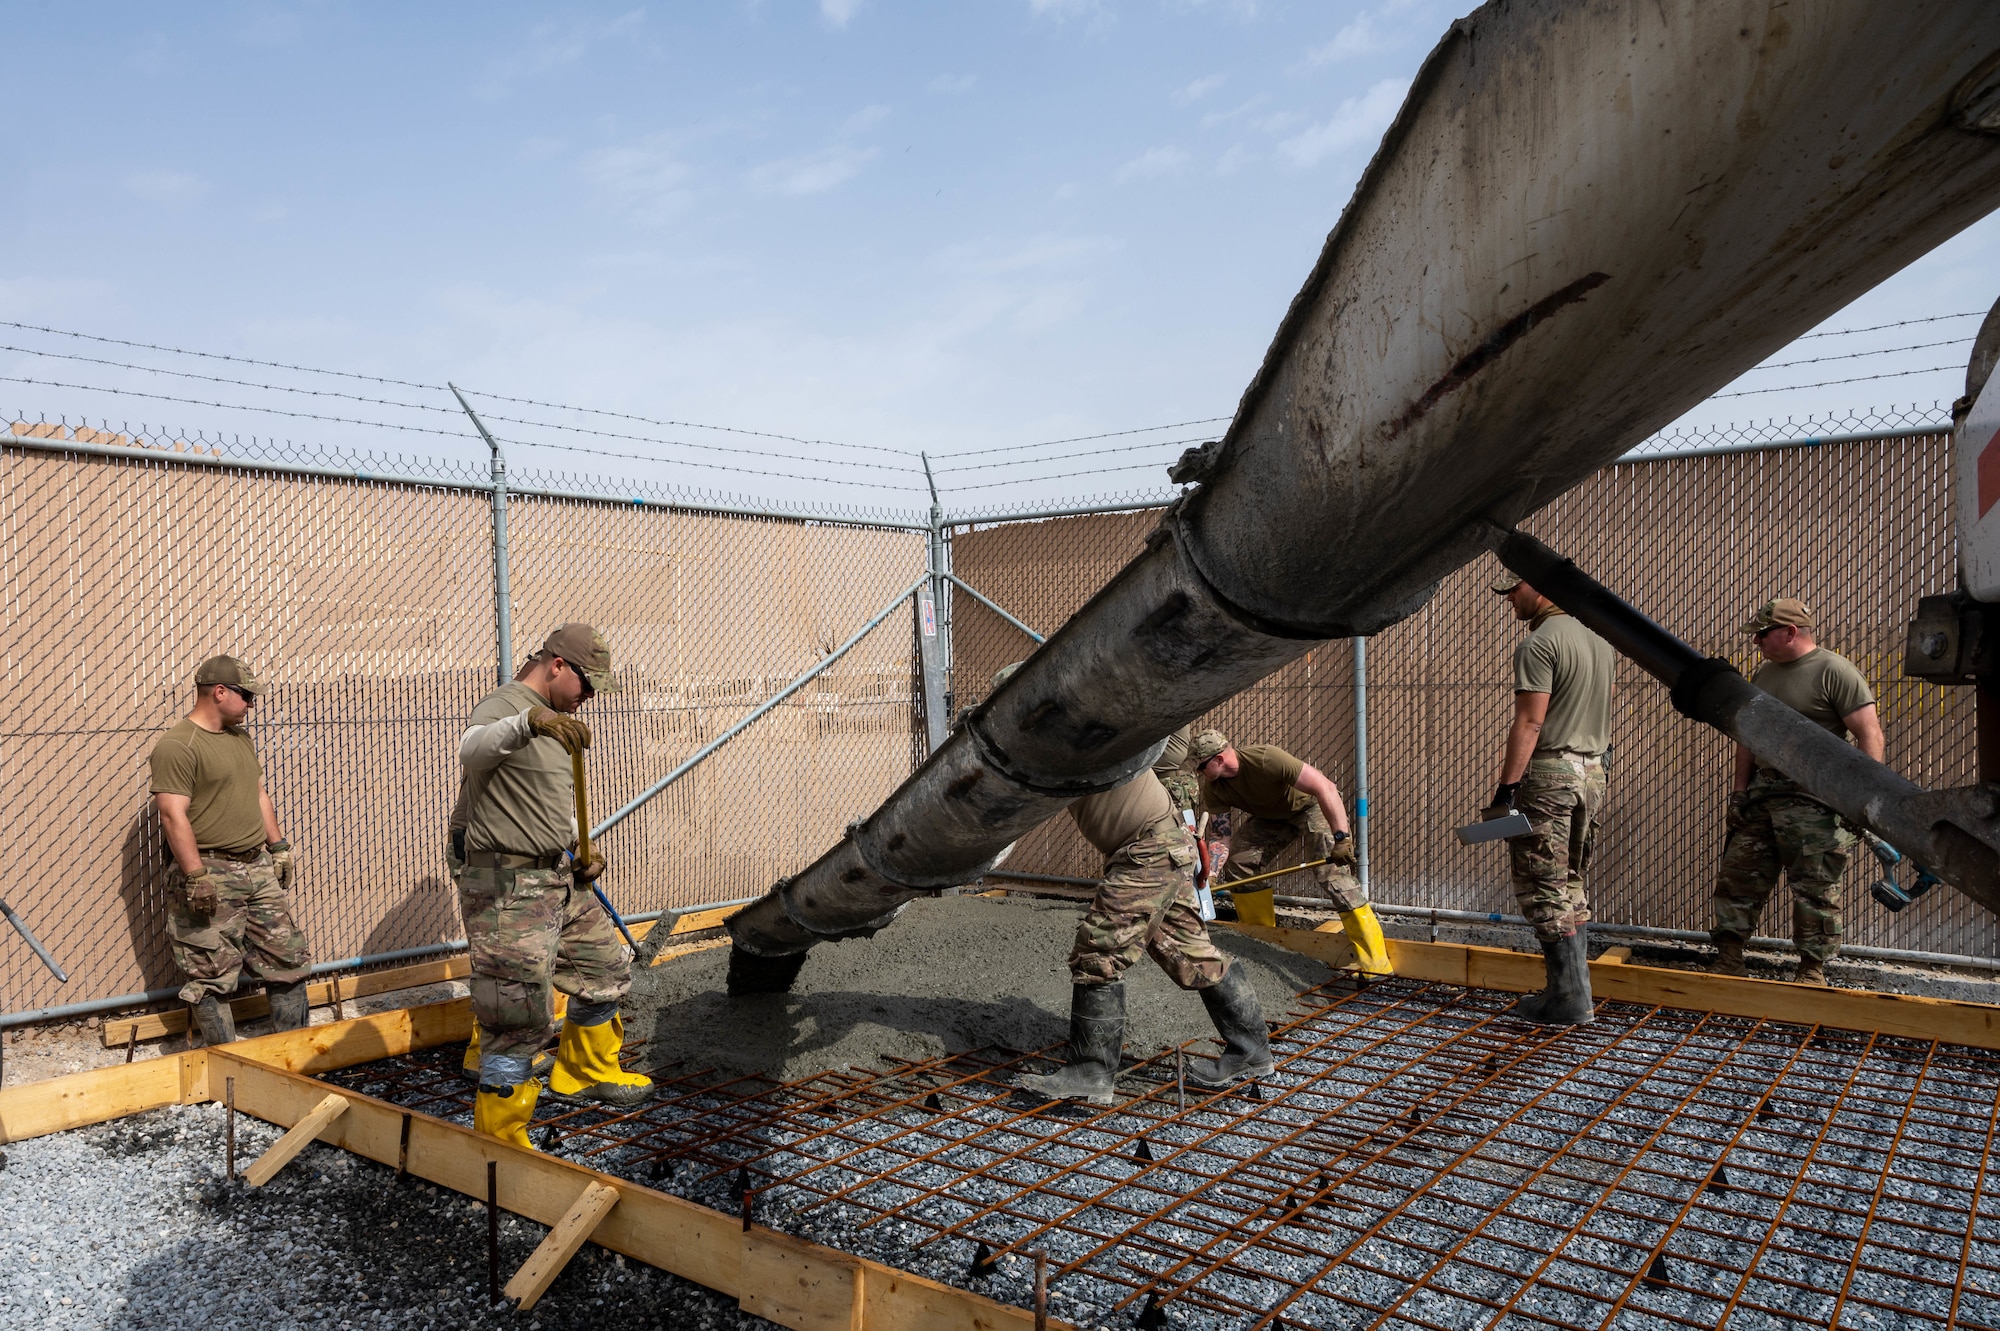 As an expeditionary engineering group based out of Al Udeid Air Base, Qatar, Prime BEEF can go anywhere in the U.S. Air Forces Central Command area of responsibility as needed. Established in October 1964, they support frontline construction, emergency management and a myriad of other specialized mission responsibilities.